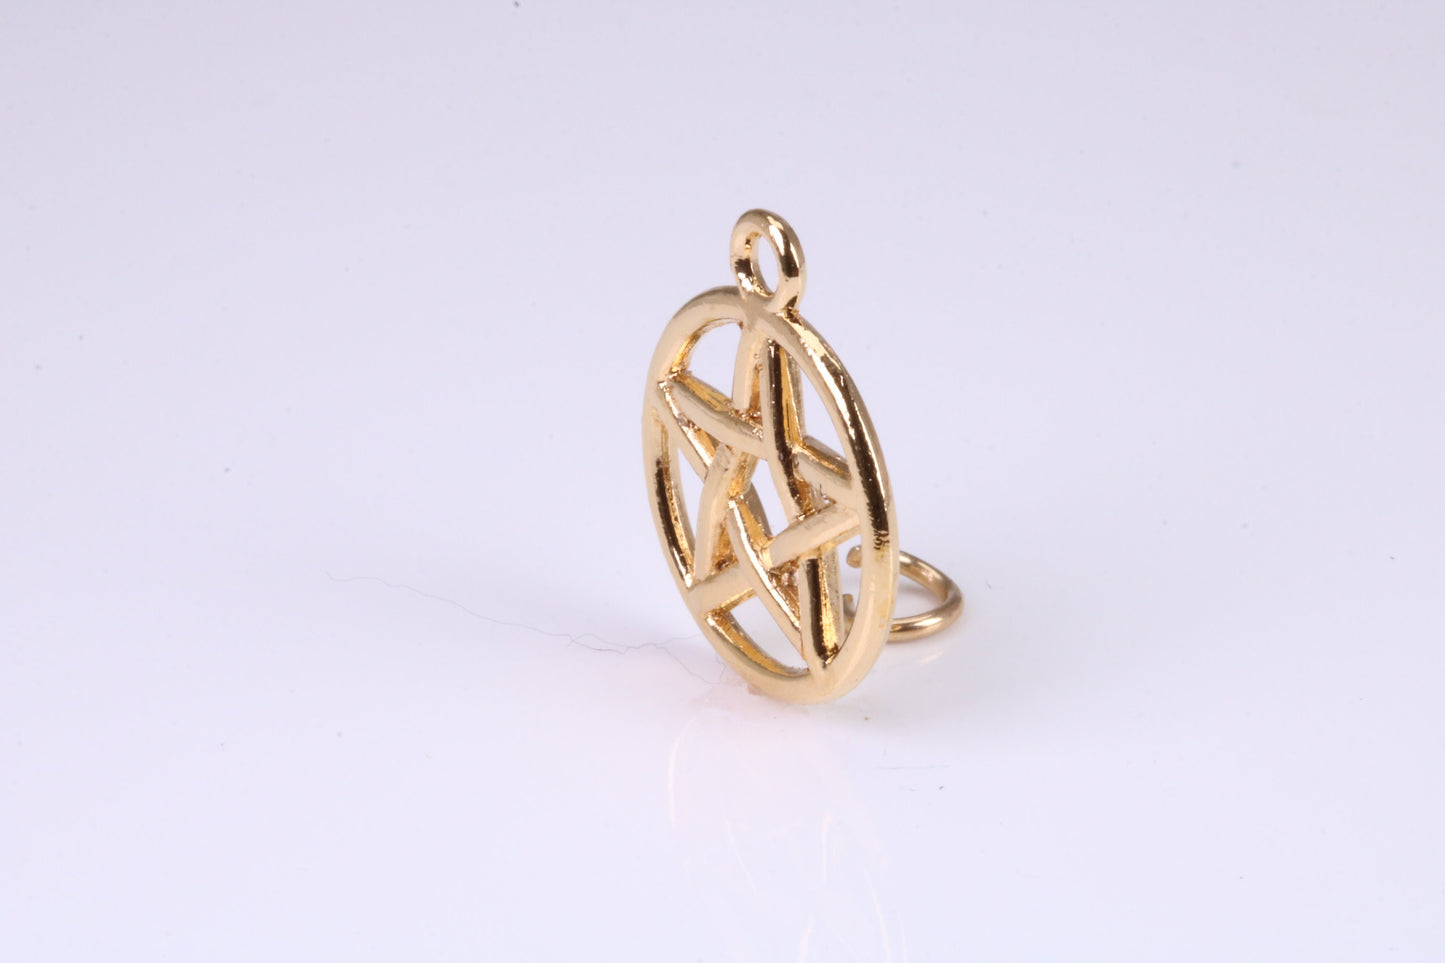 Pentagram Charm, Made from solid Yellow Gold, British Hallmarked